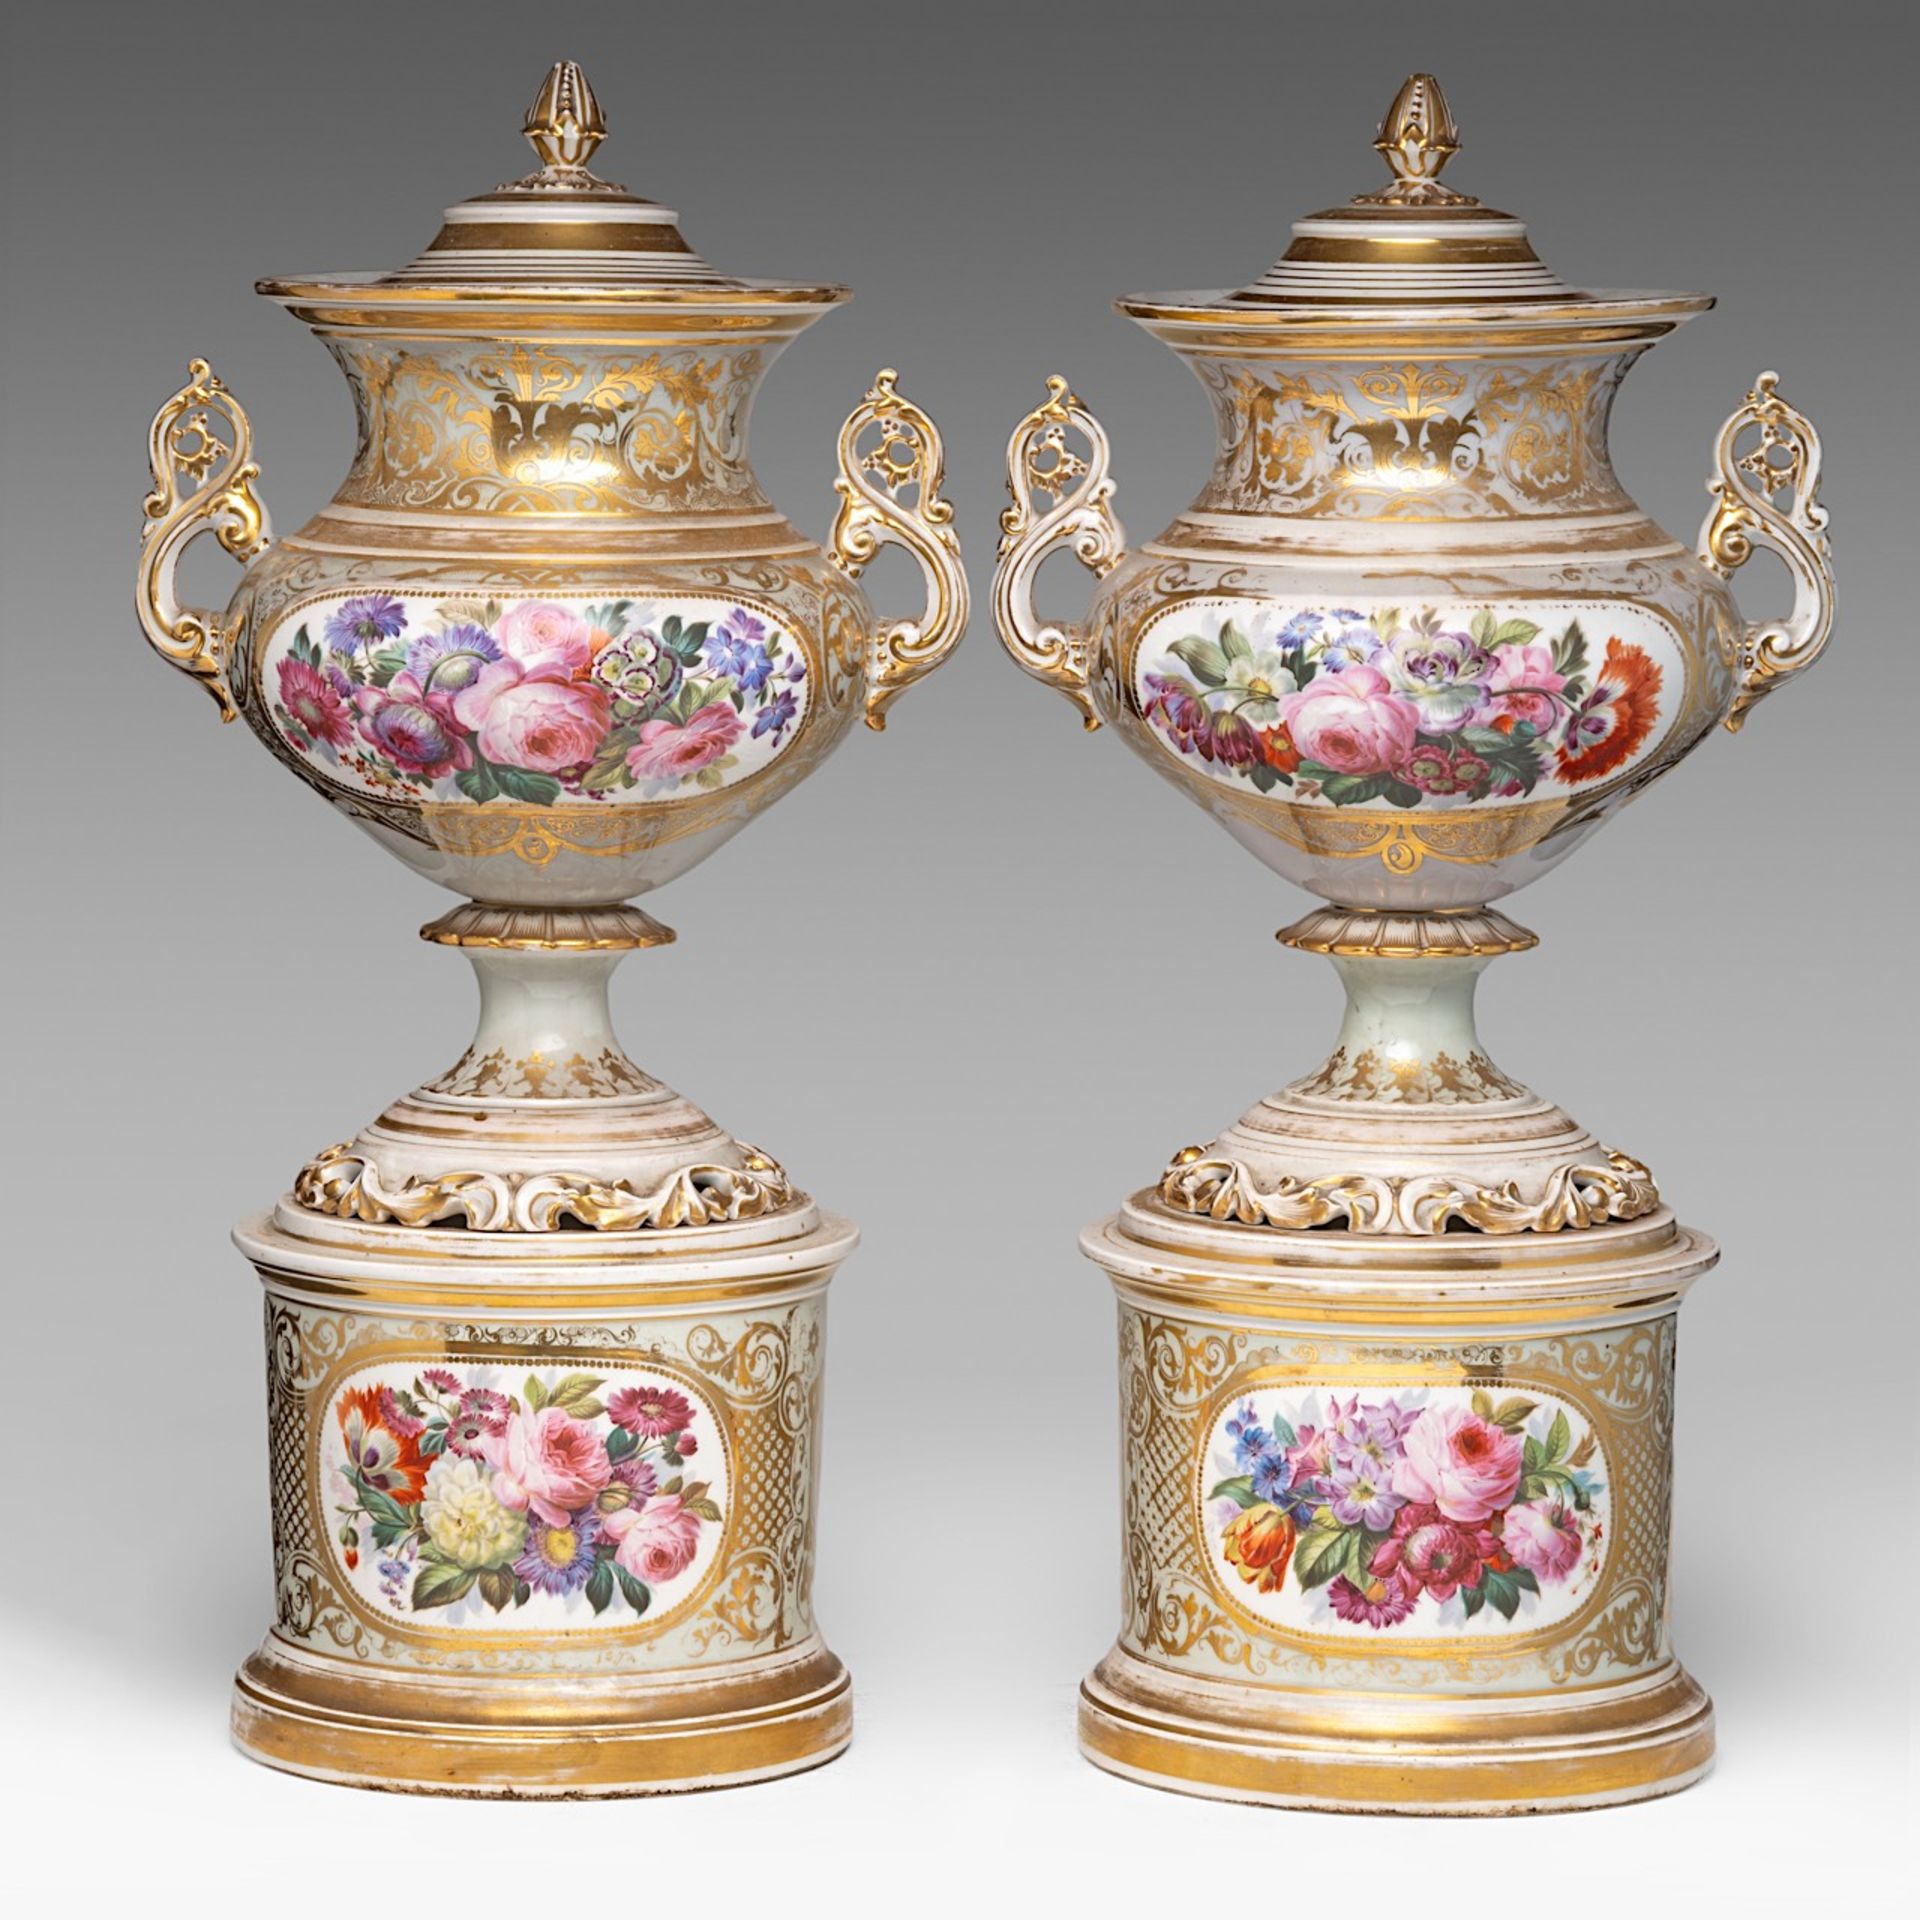 A large pair of Napoleon III gilt and polychrome porcelain vases and covers on stands, late 19thC, H - Bild 3 aus 4